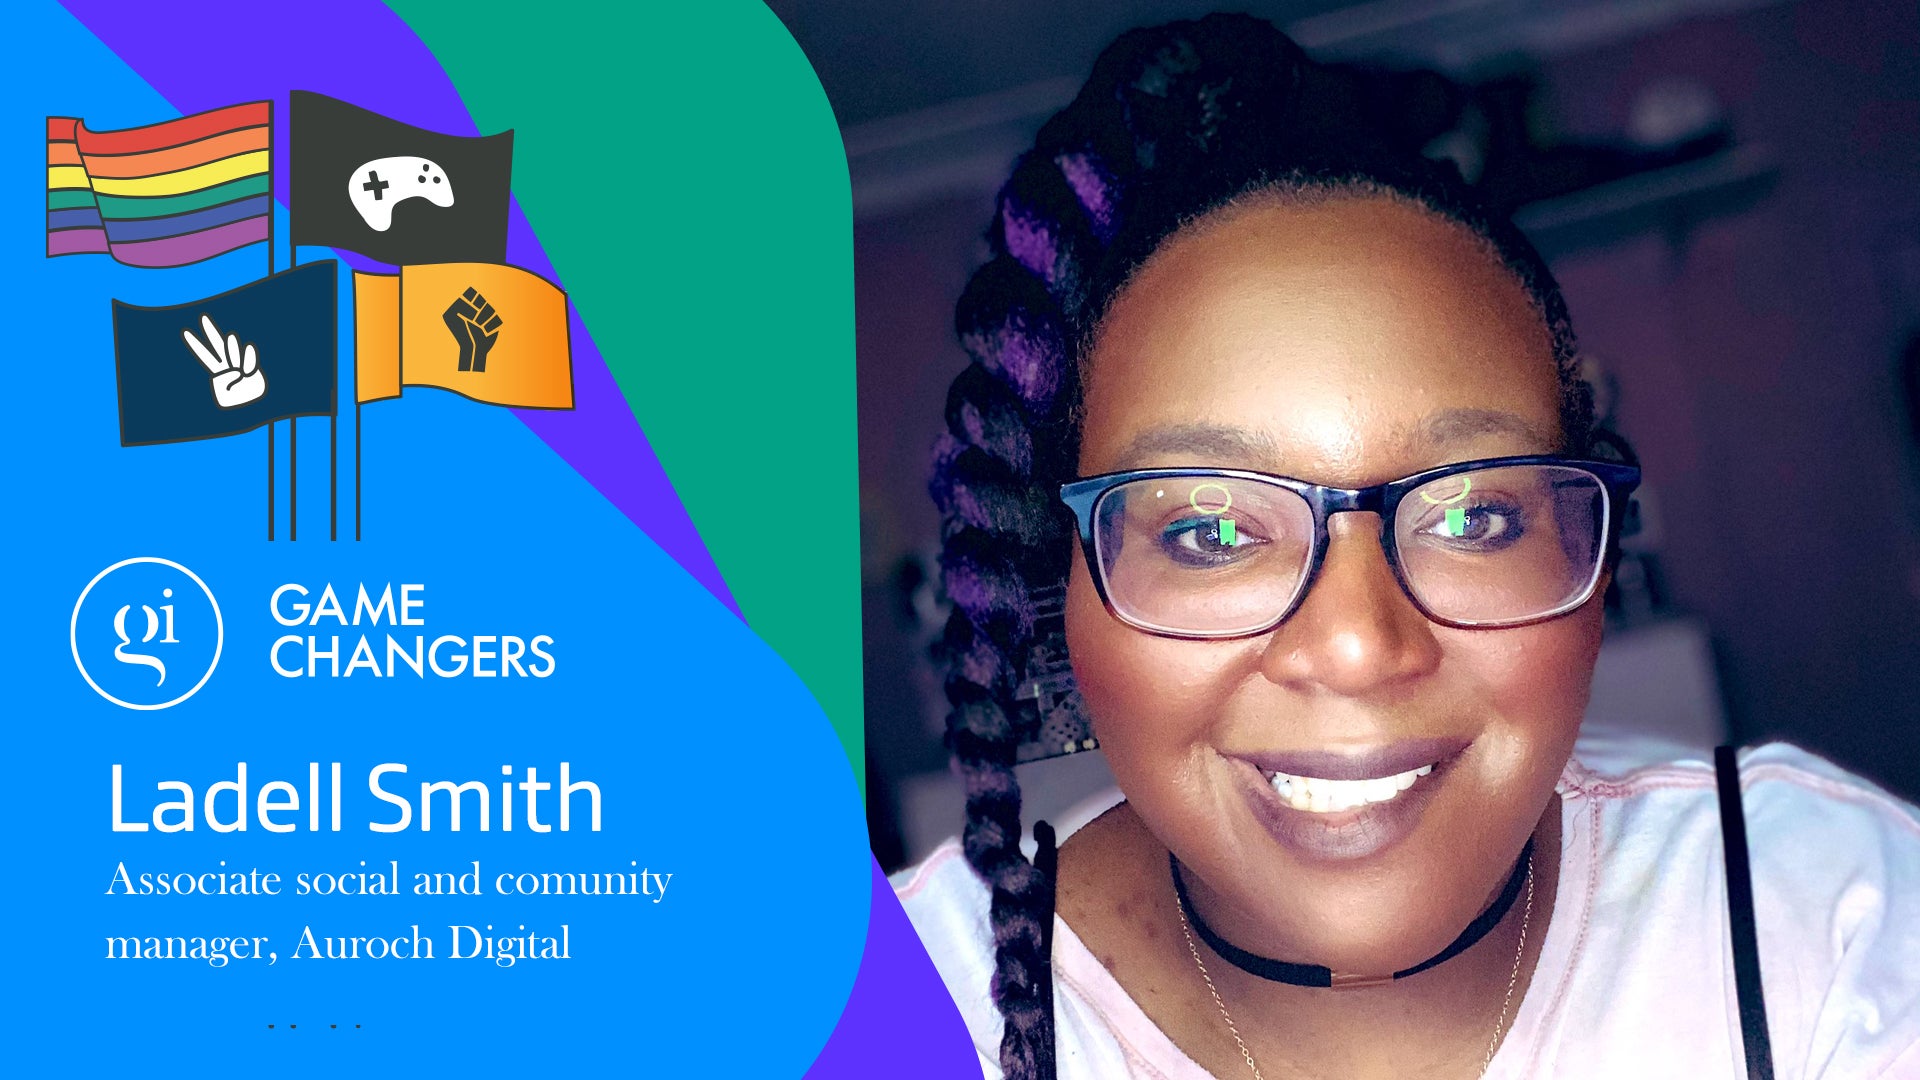 Image for Game Changers | Ladell Smith, Auroch Digital